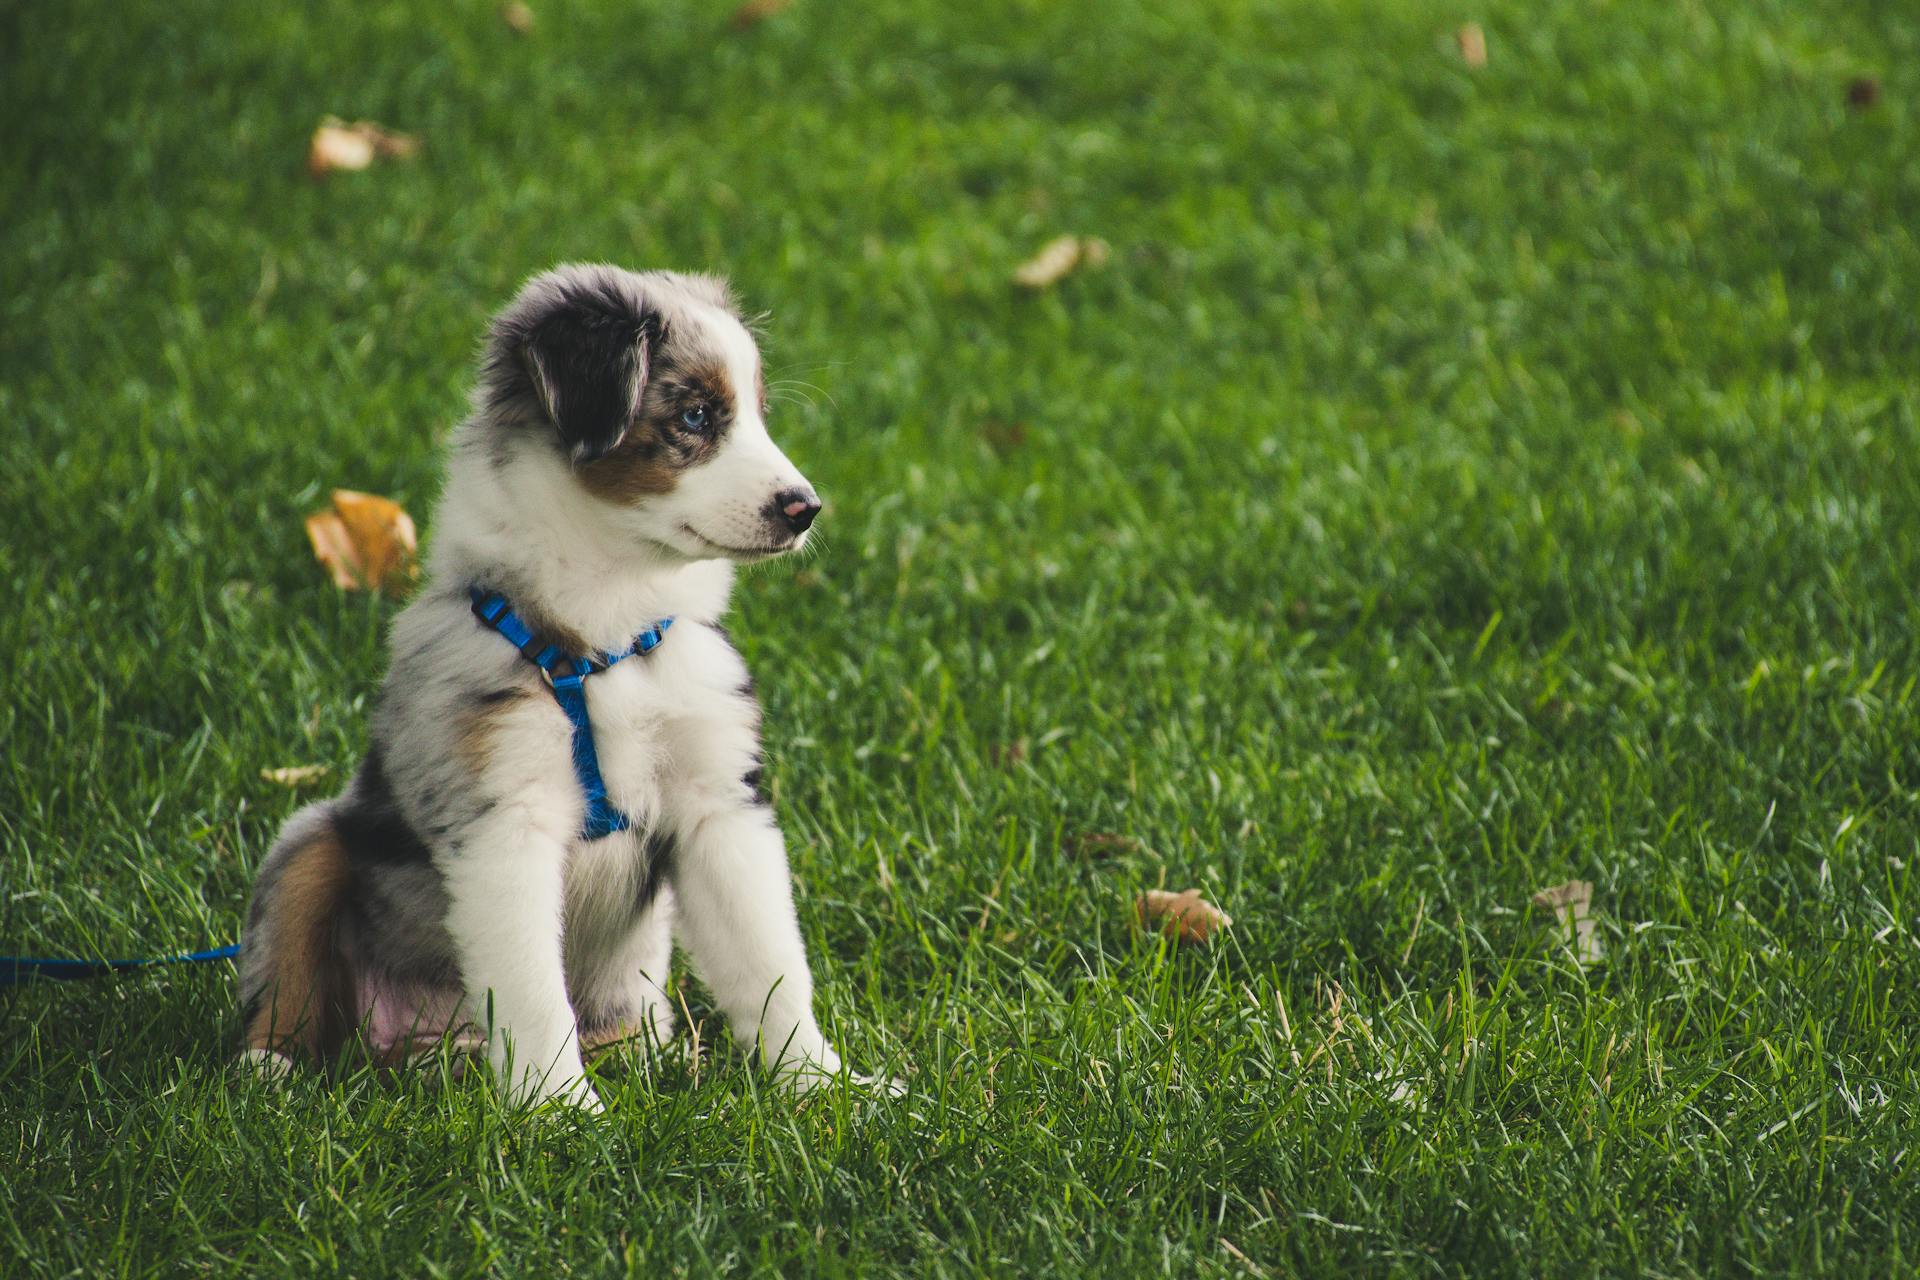 A puppy sitting on the lawn | Source: Pexels